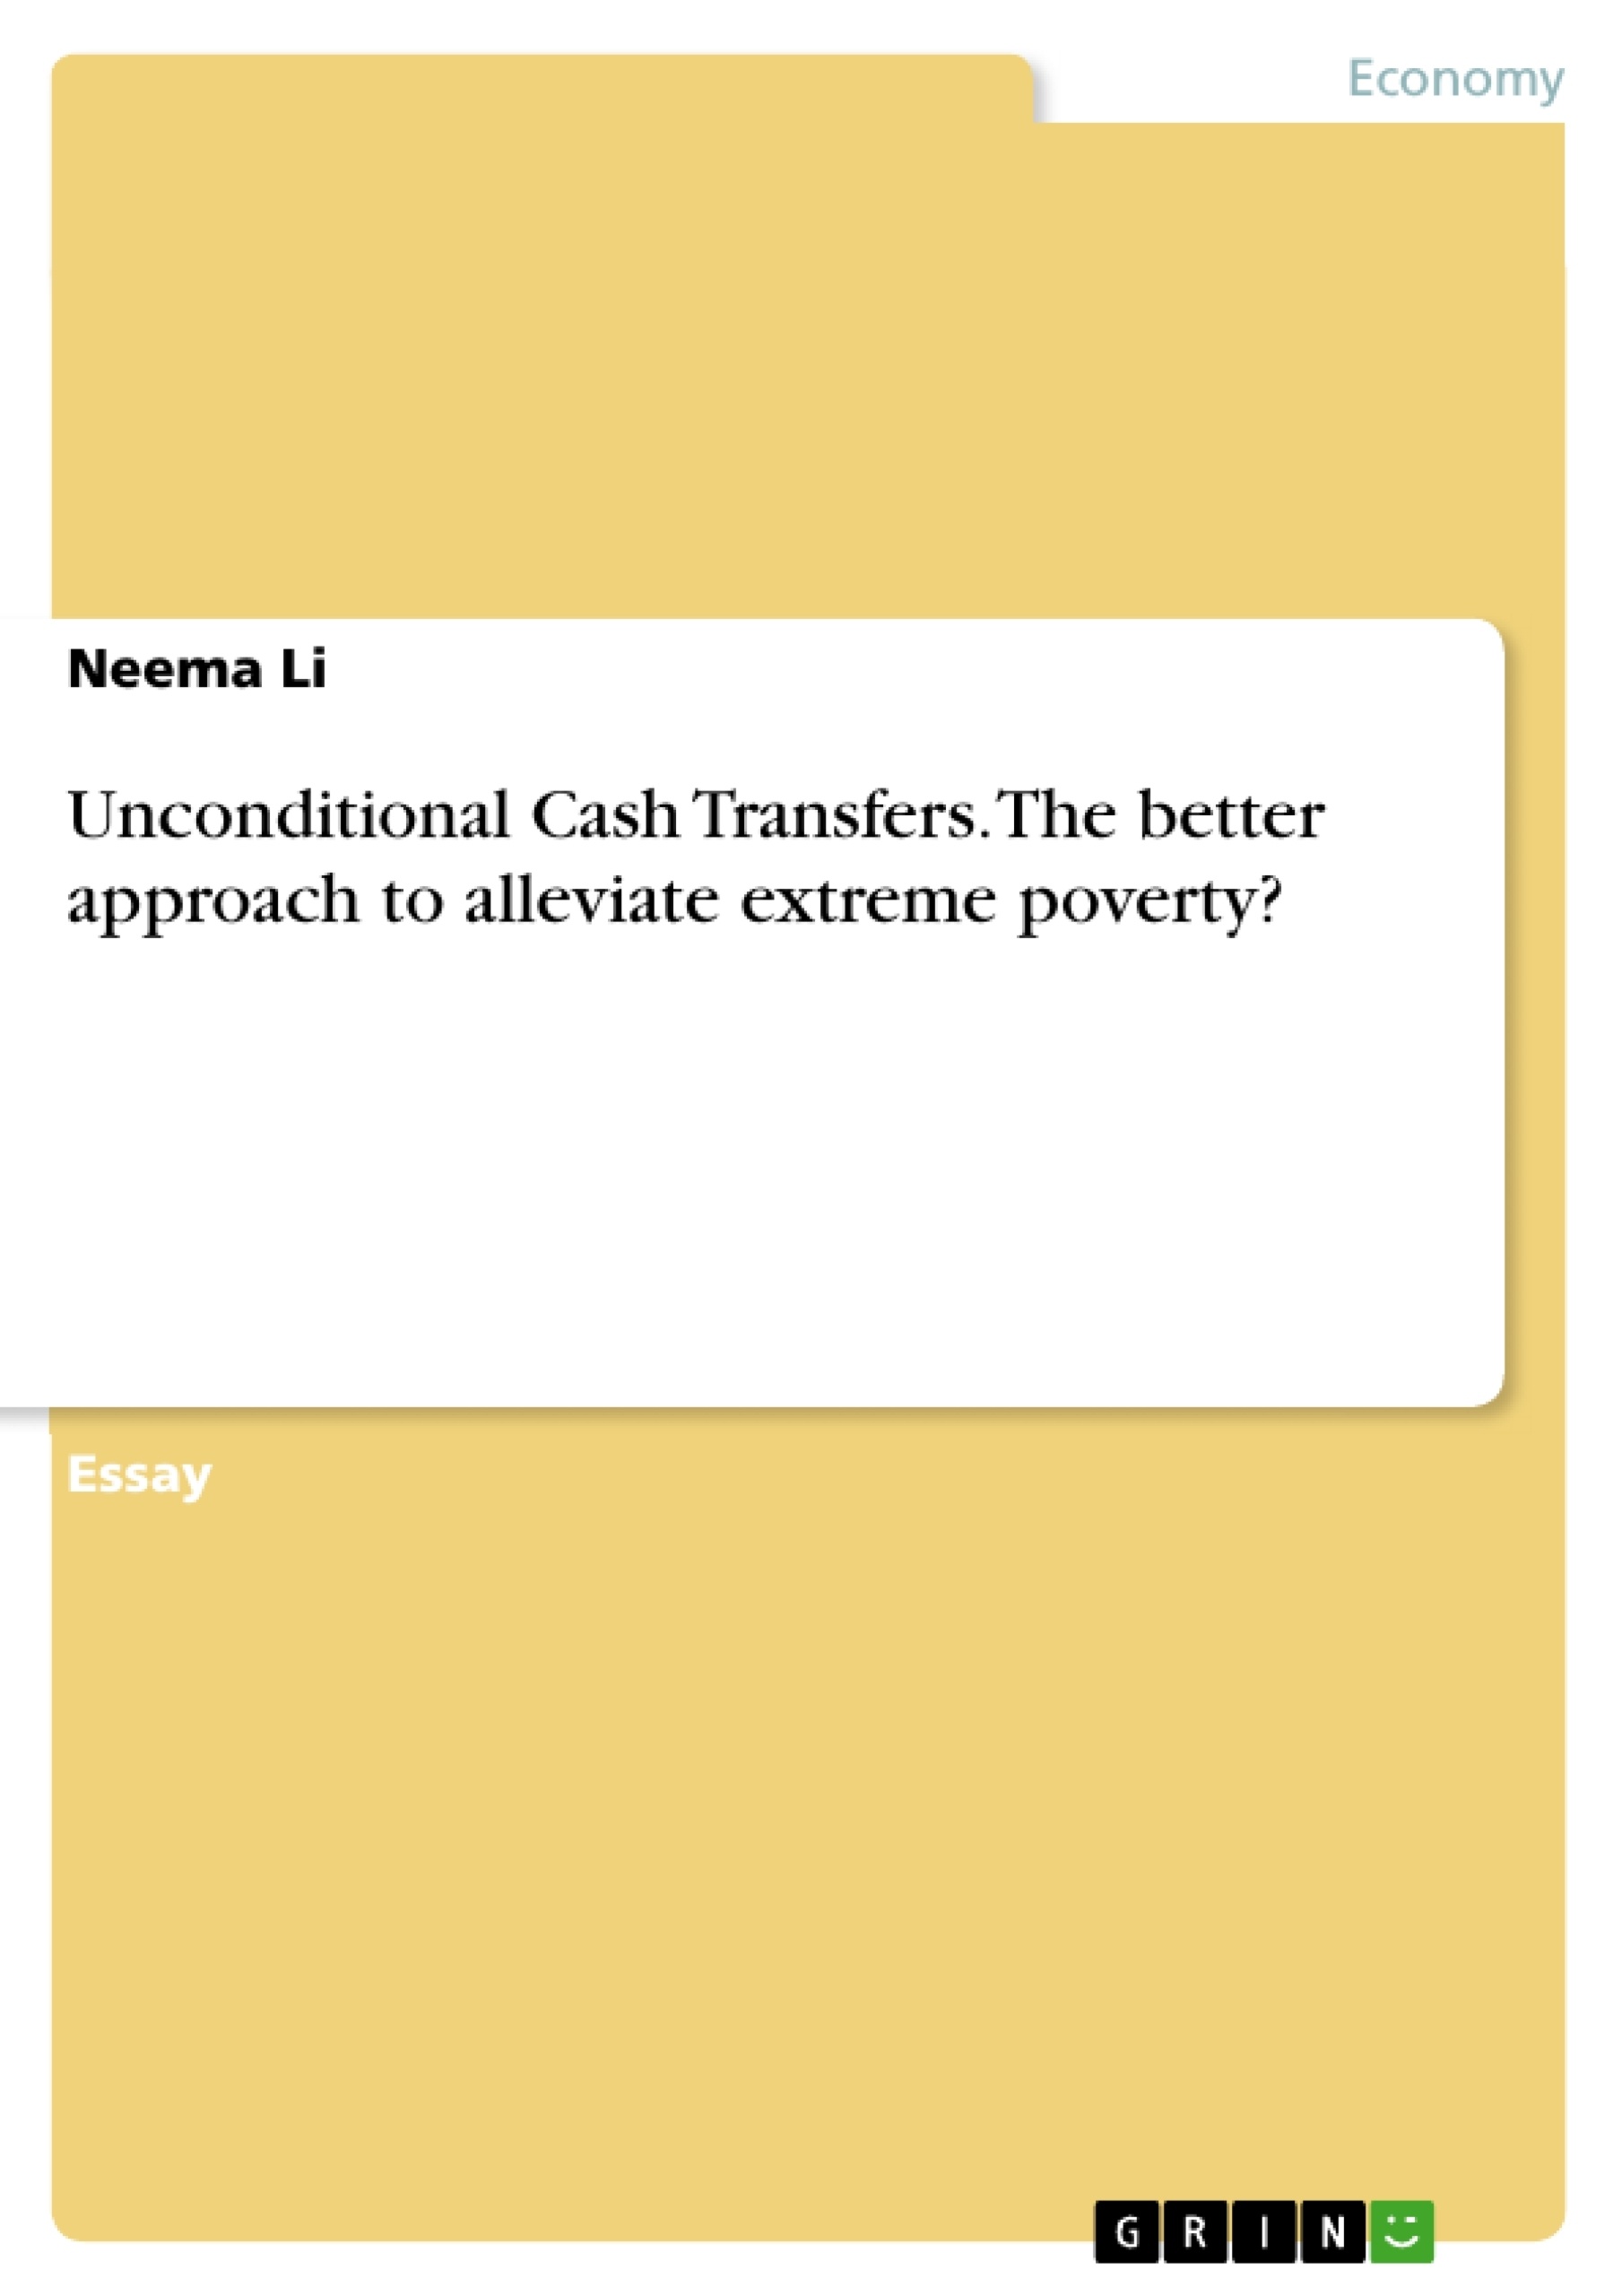 Titel: Unconditional Cash Transfers. The better approach to alleviate extreme poverty?